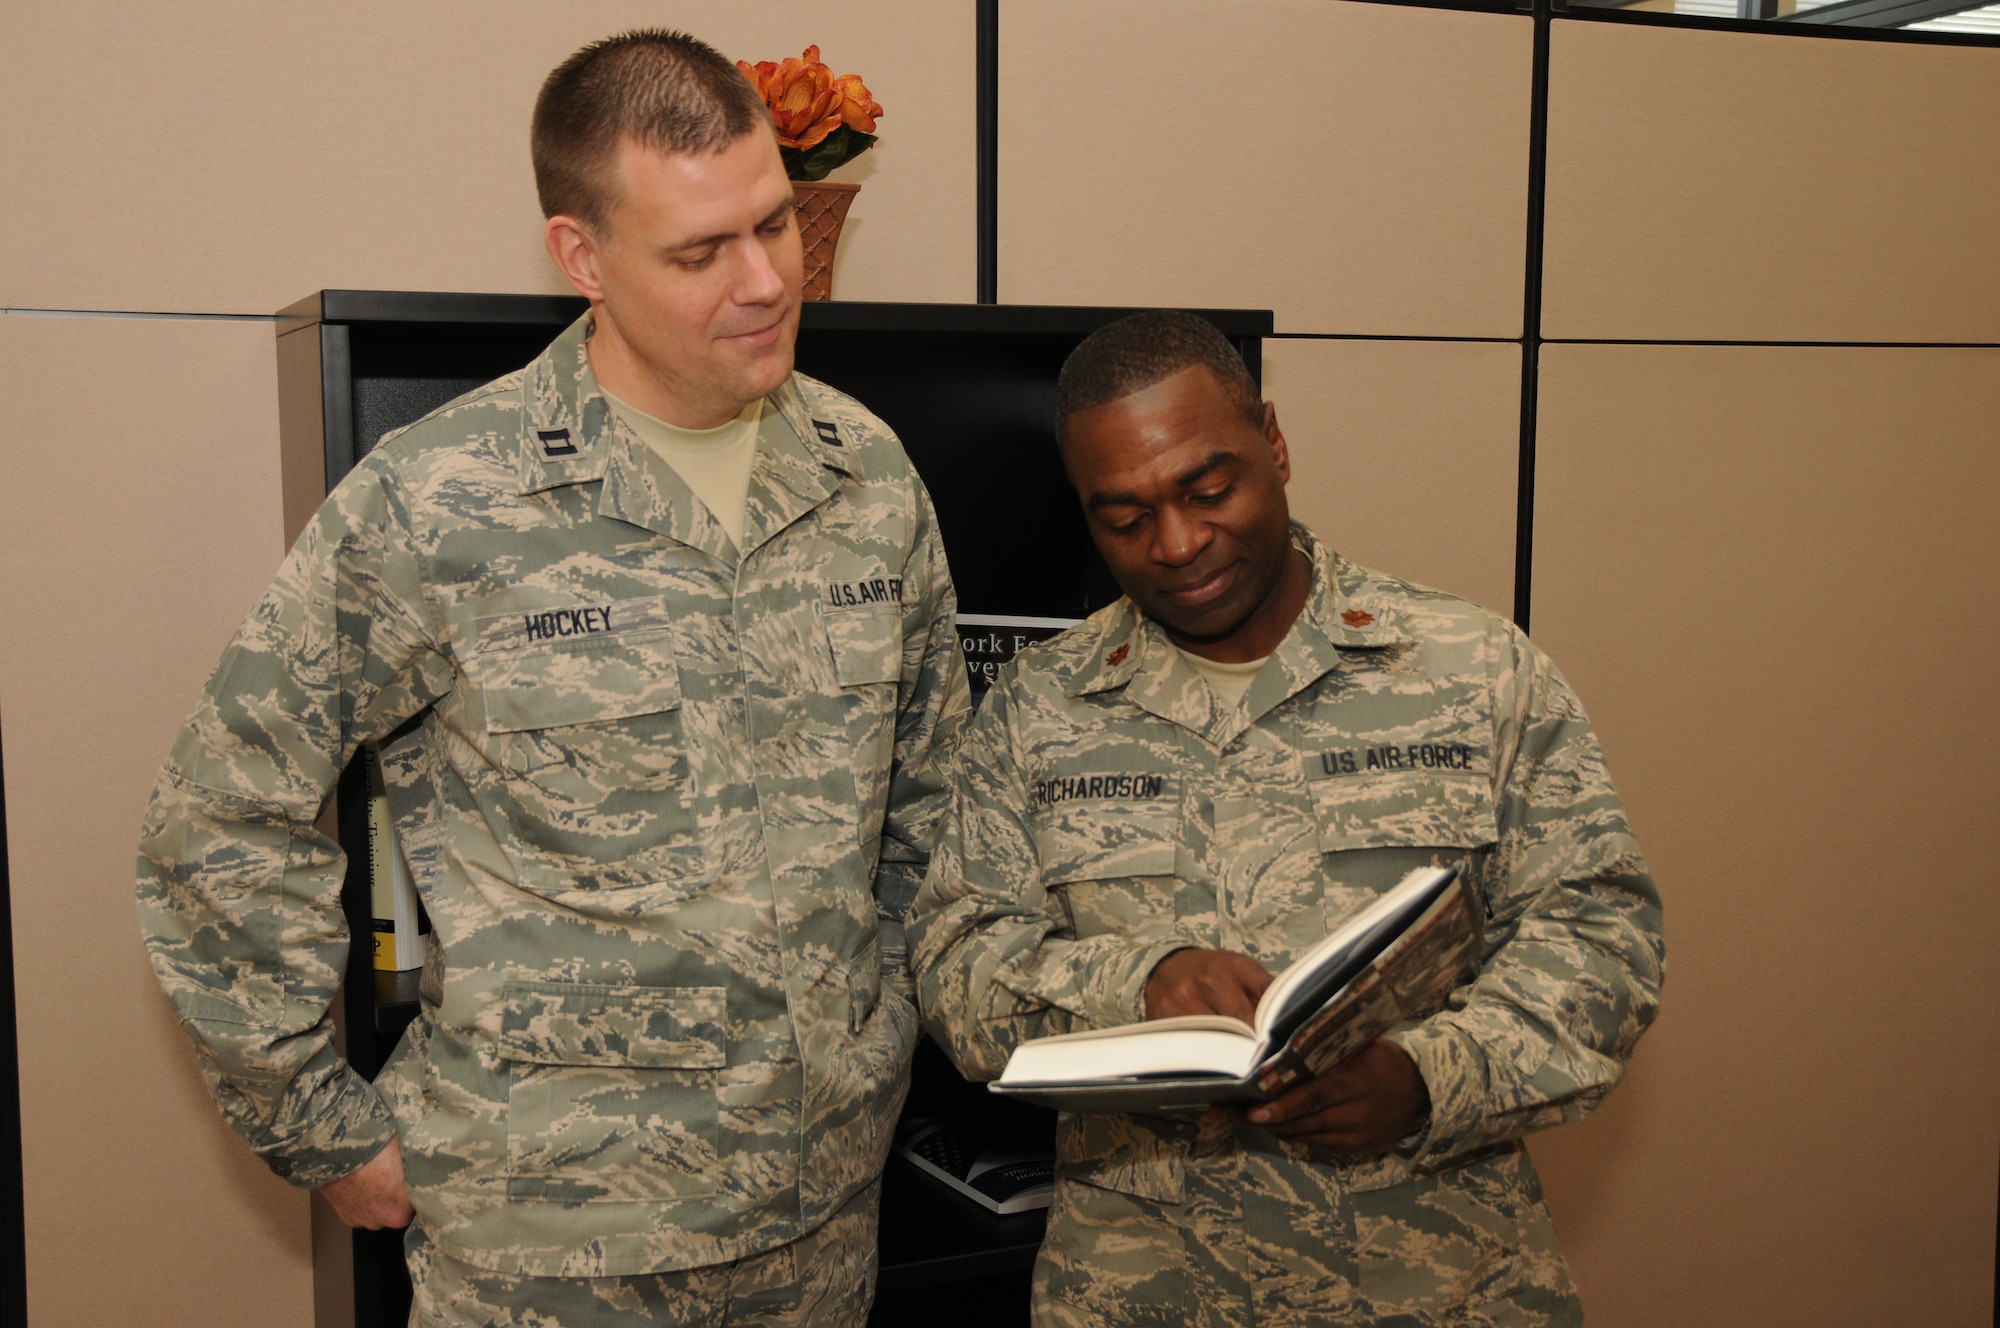 New York Air National Guard Maj. Gary Richardson (right), 174th Attack Wing Equal Opportunity Director and Capt. James Hockey, Equal Opportunity Officer, read a passage from a book on equal opportunity at the Joint Health and Wellness Center on Hancock Field Air National Guard Base, Syracuse, NY February 3, 2013. Richardson is preparing for his job as the Equal Opportunity service liaison for the National Guard Component. (Photo by NY Air National Guard Senior Airman Duane Morgan/Released)